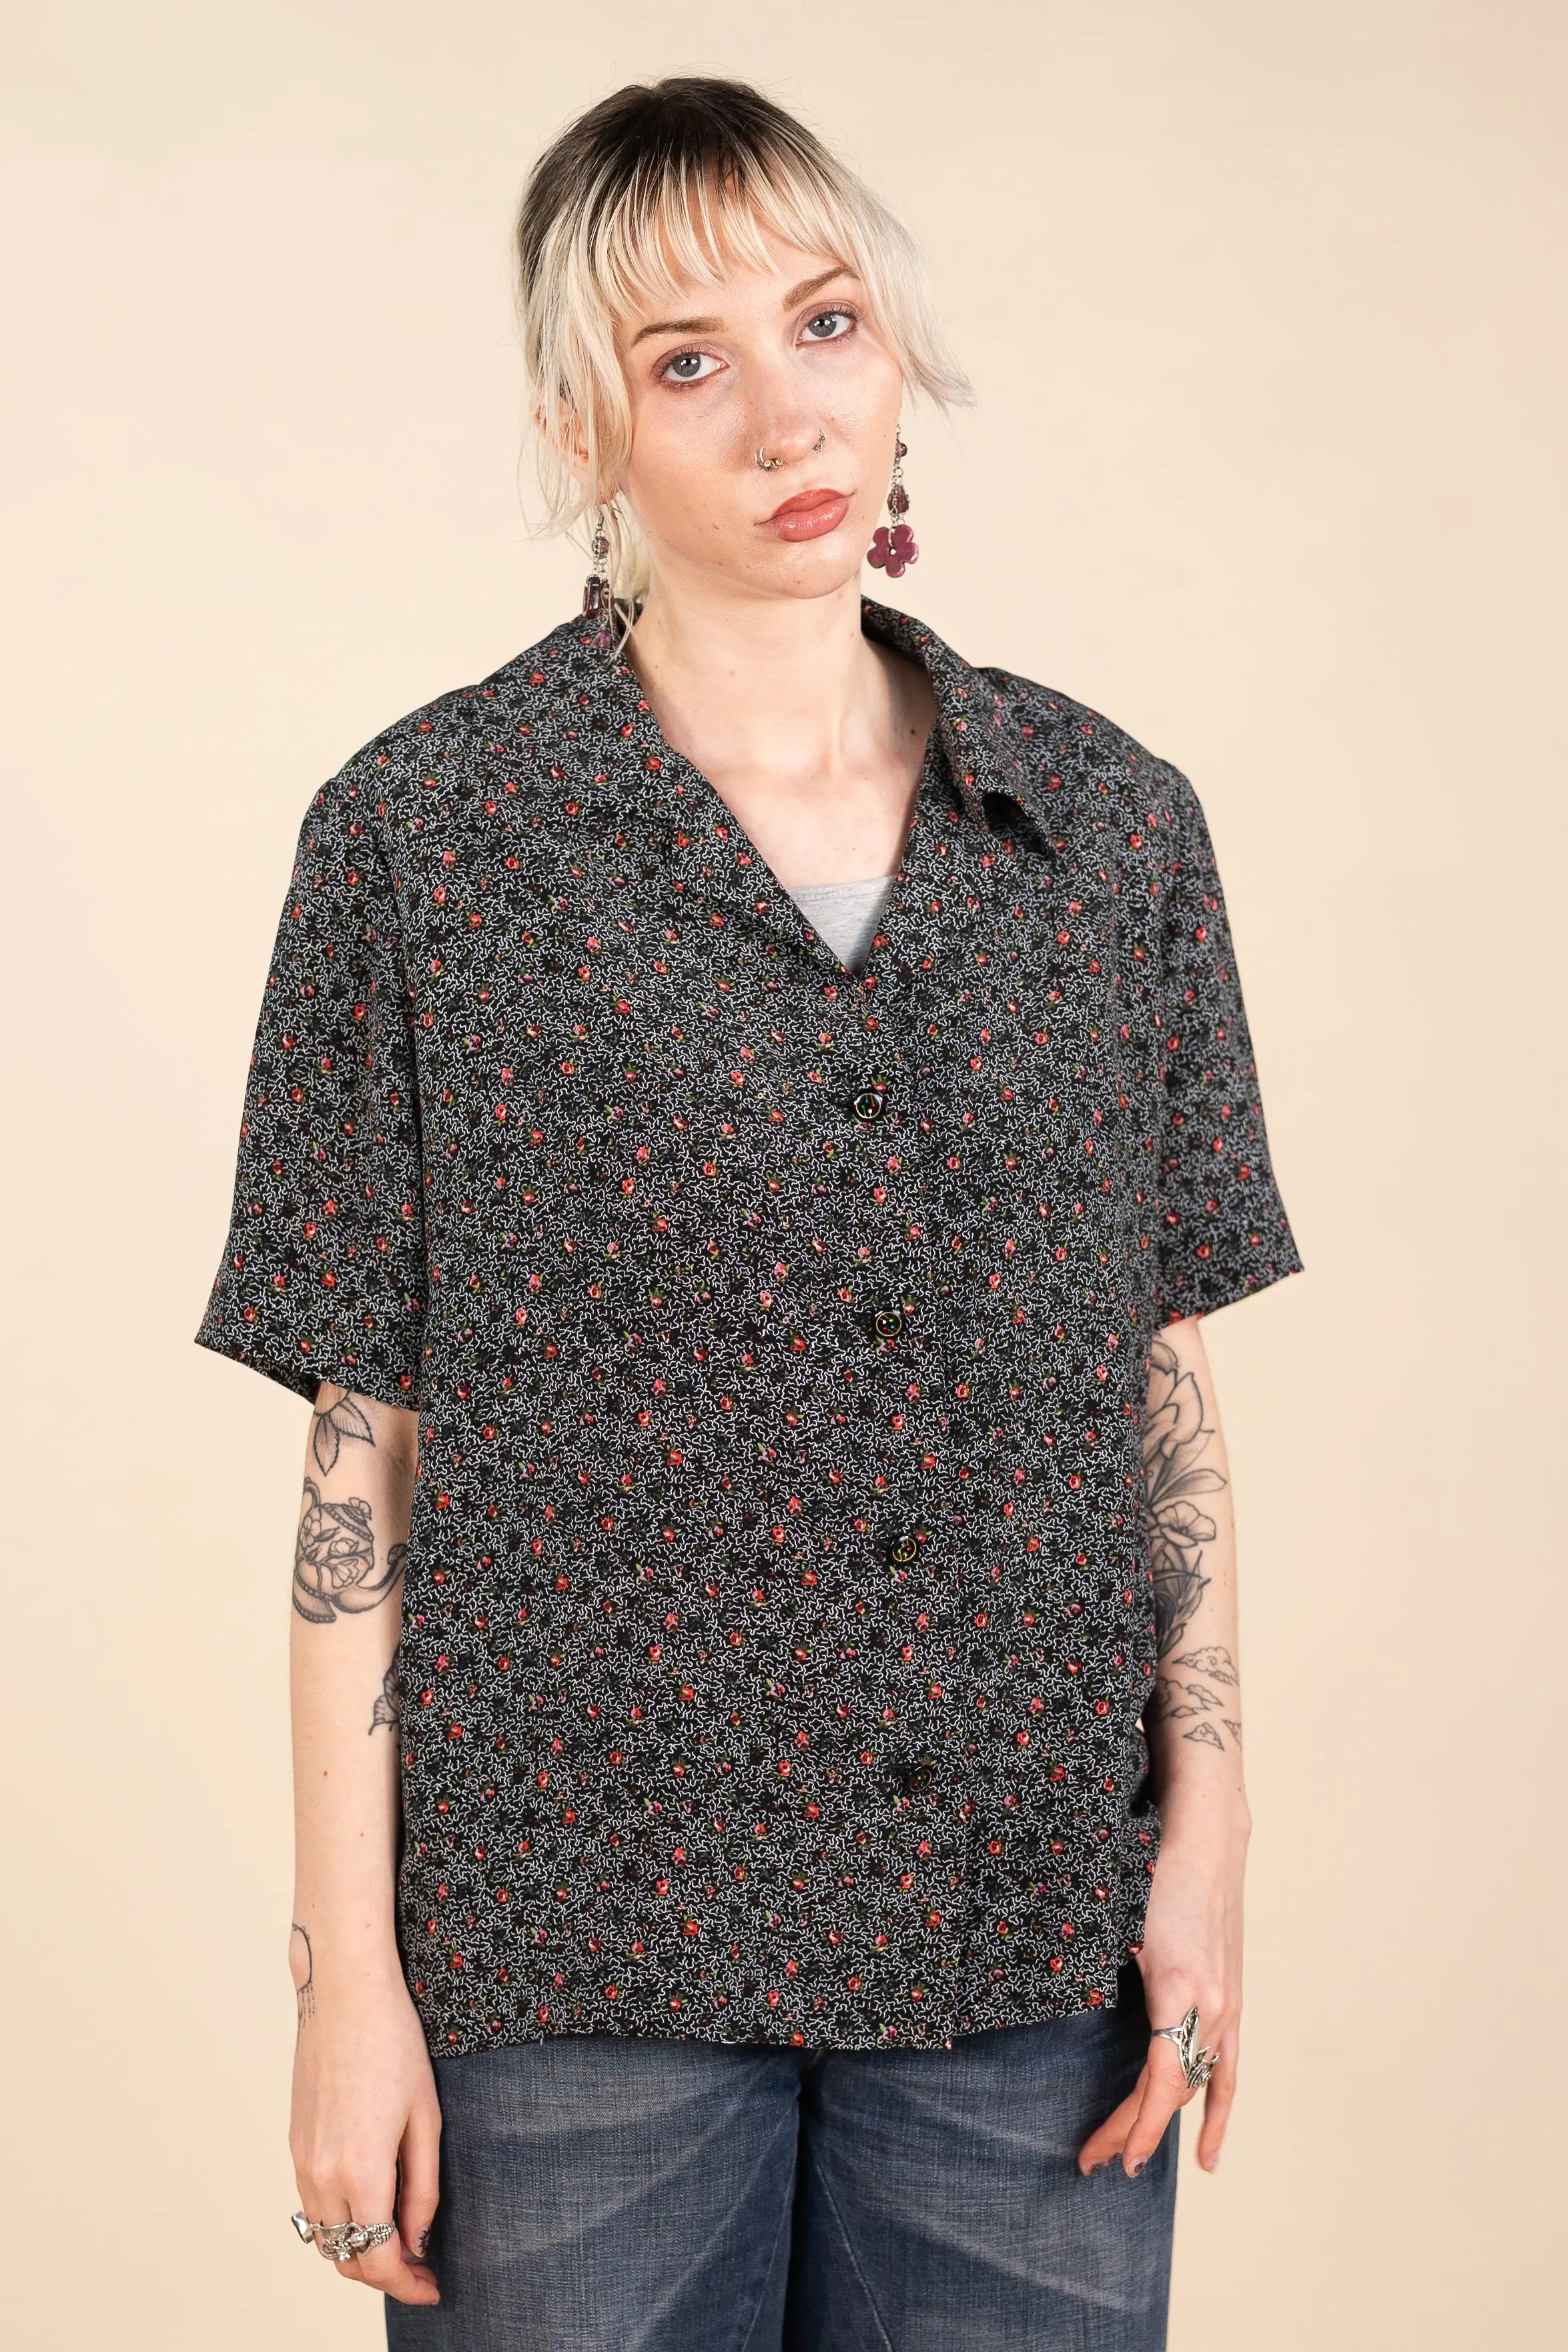 Unknown - Handmade 90s Shirt- ThriftTale.com - Vintage and second handclothing